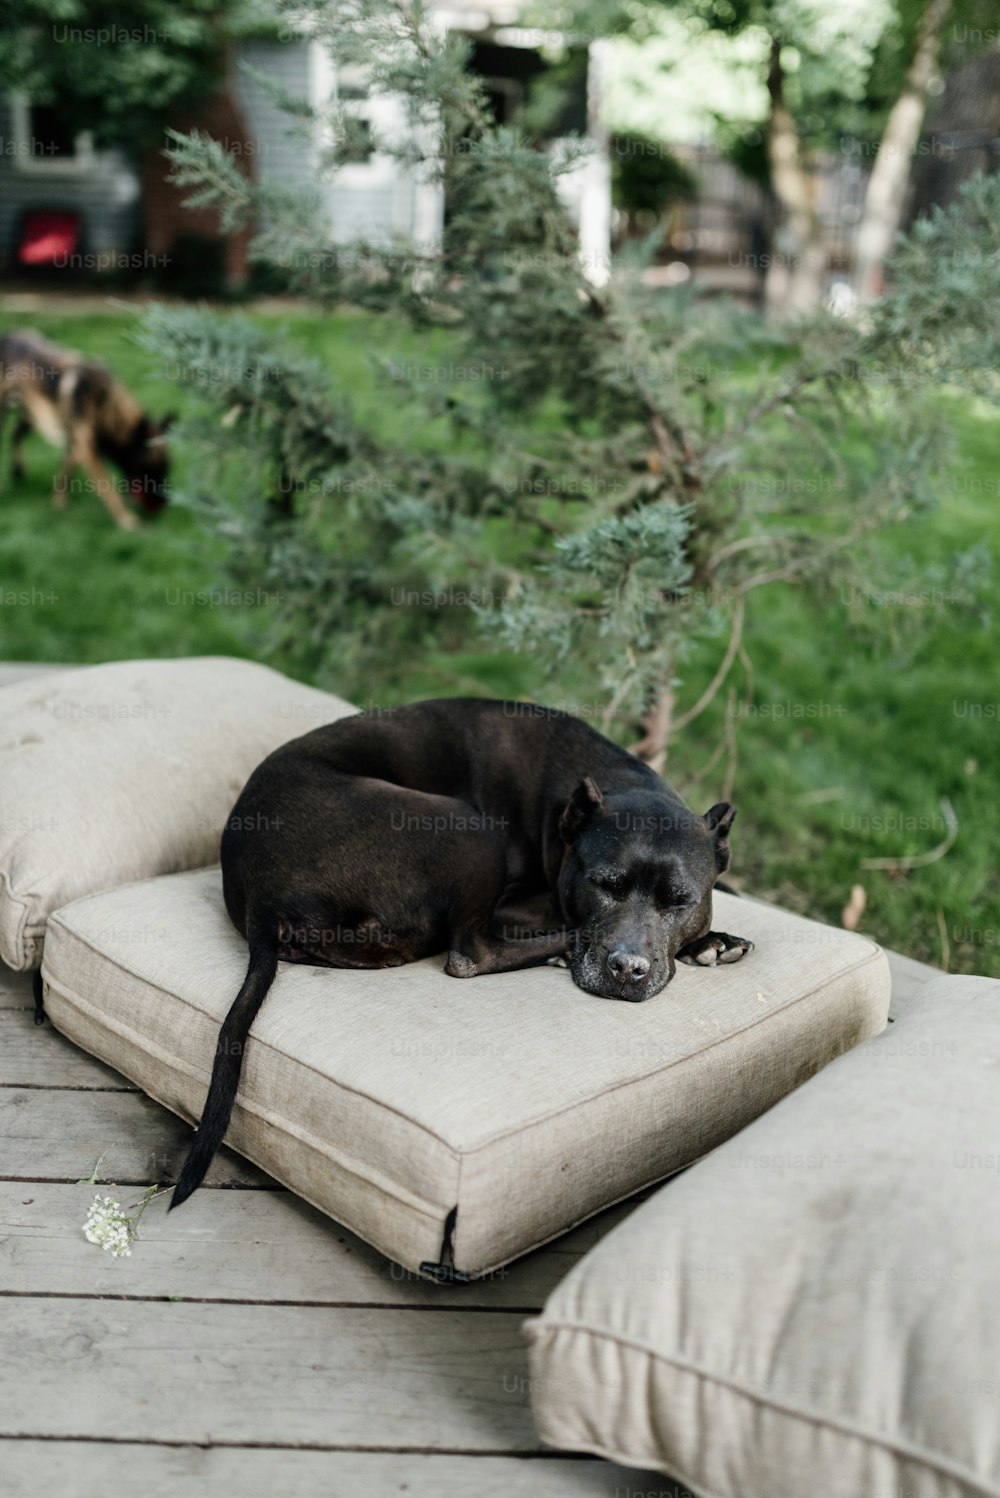 a black dog laying on top of a pillow on a wooden deck